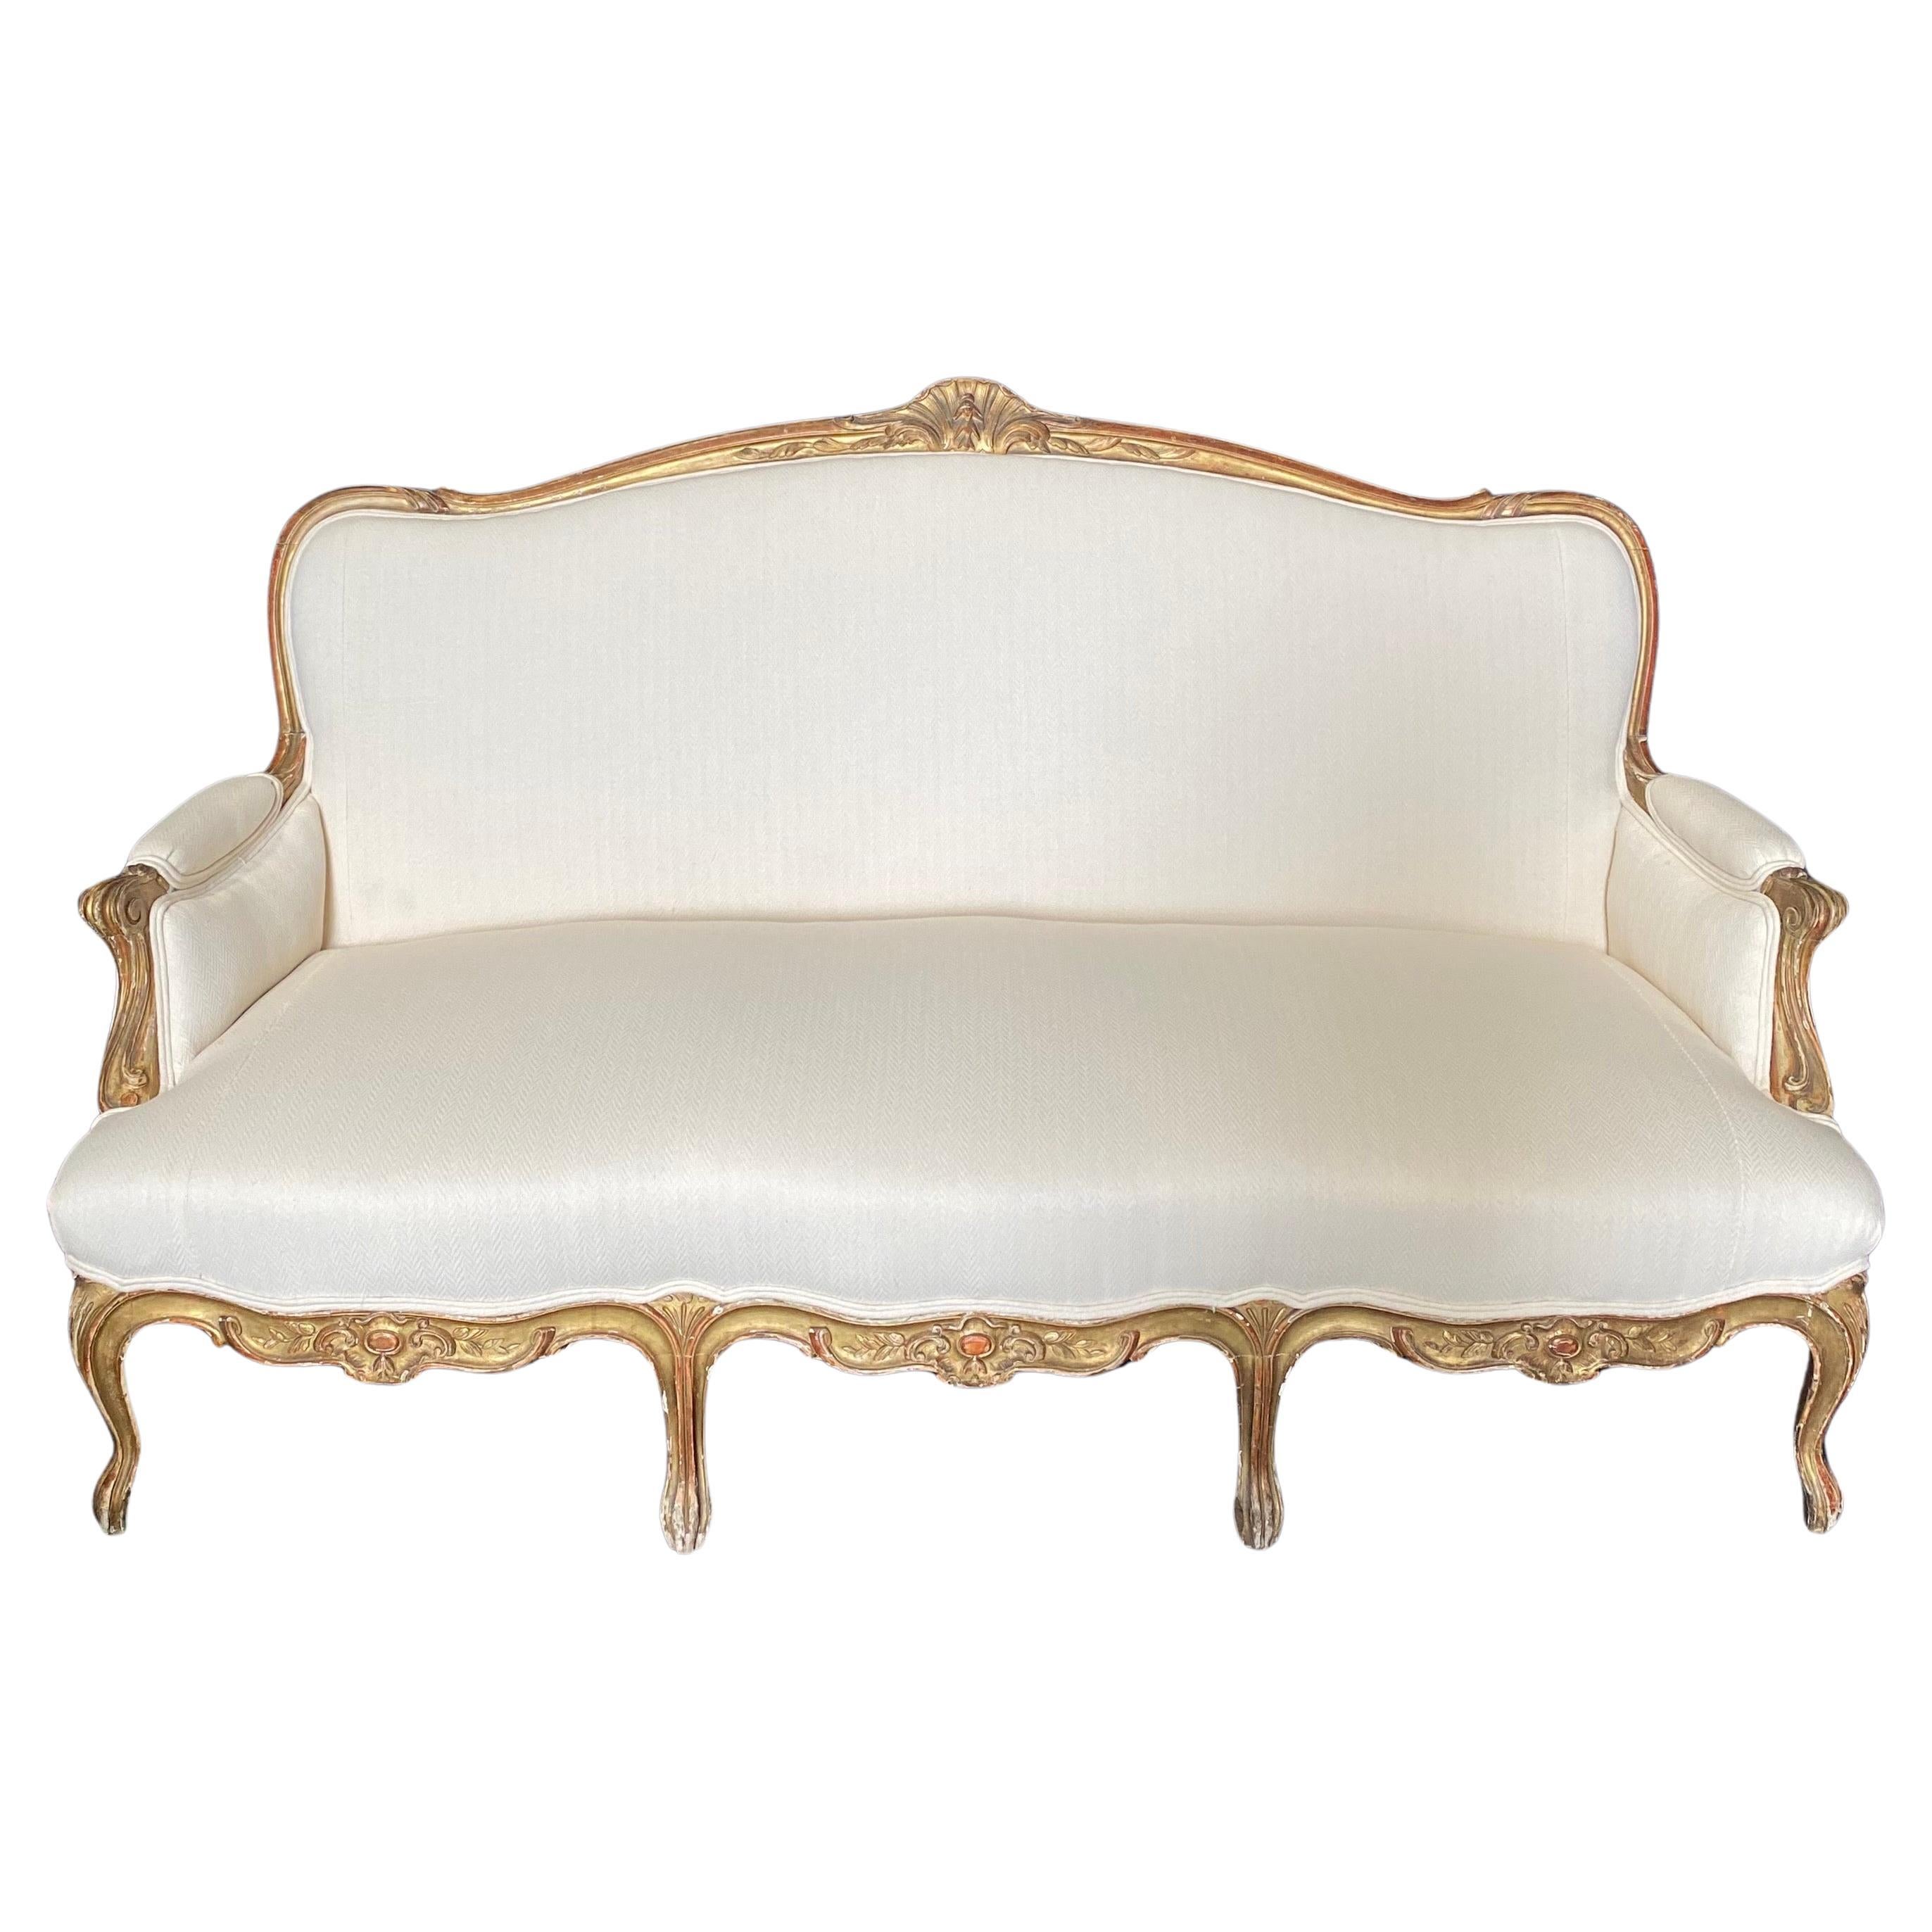 Superb Carved Gilded 19th Century Louis XV French Provencal Sofa For Sale